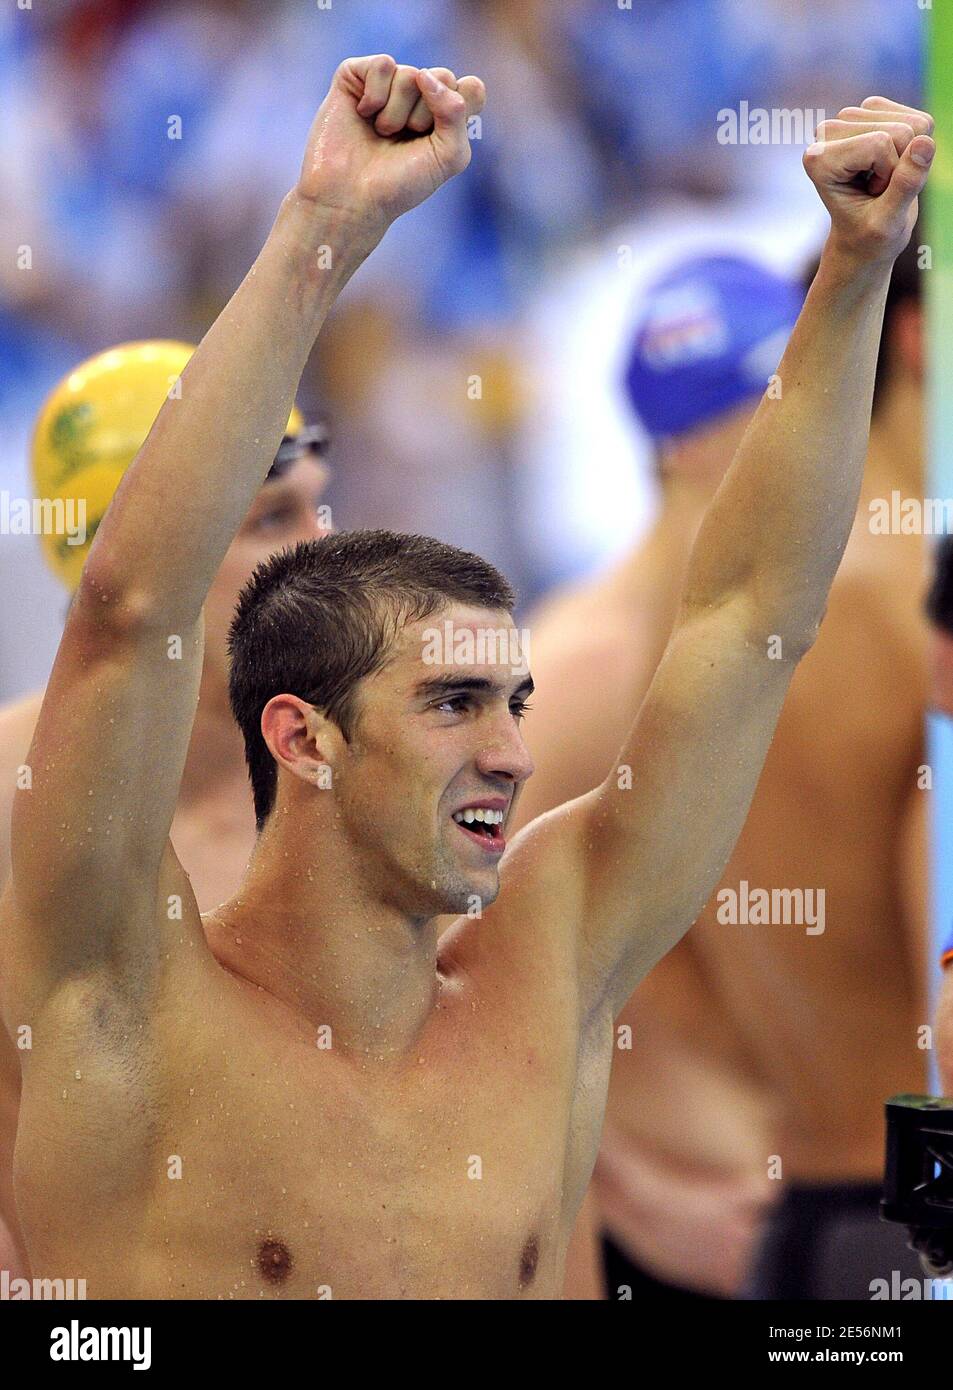 Michael Phelps of the United States celebrates after winning gold medals in the Men's 4x100 Medley Relay at the XXIX Beijing Olympic Games Day 9 at the National Aquatic Center in Beijing, China on August 17, 2008. Photo by Willis Parker/Cameleon/ABACAPRESS.COM Stock Photo